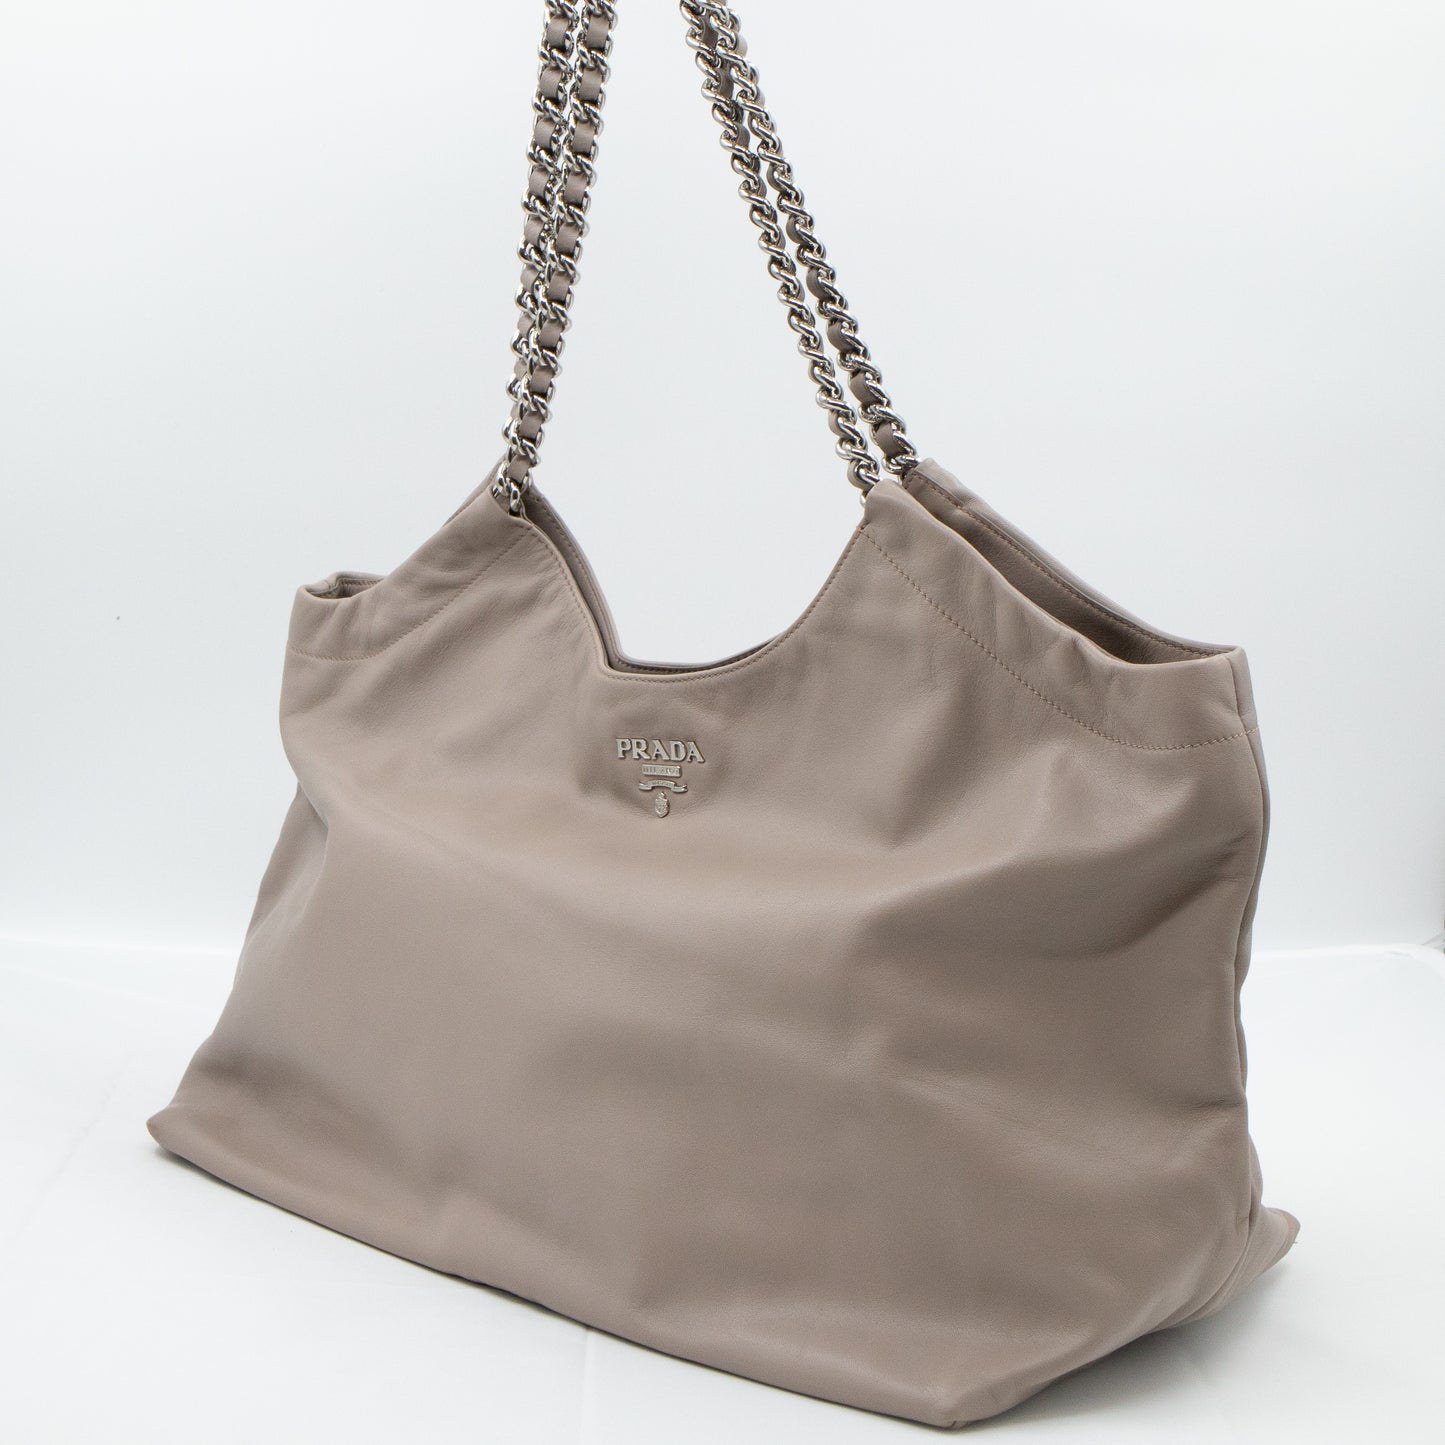 Soft Chain Tote Gray Leather